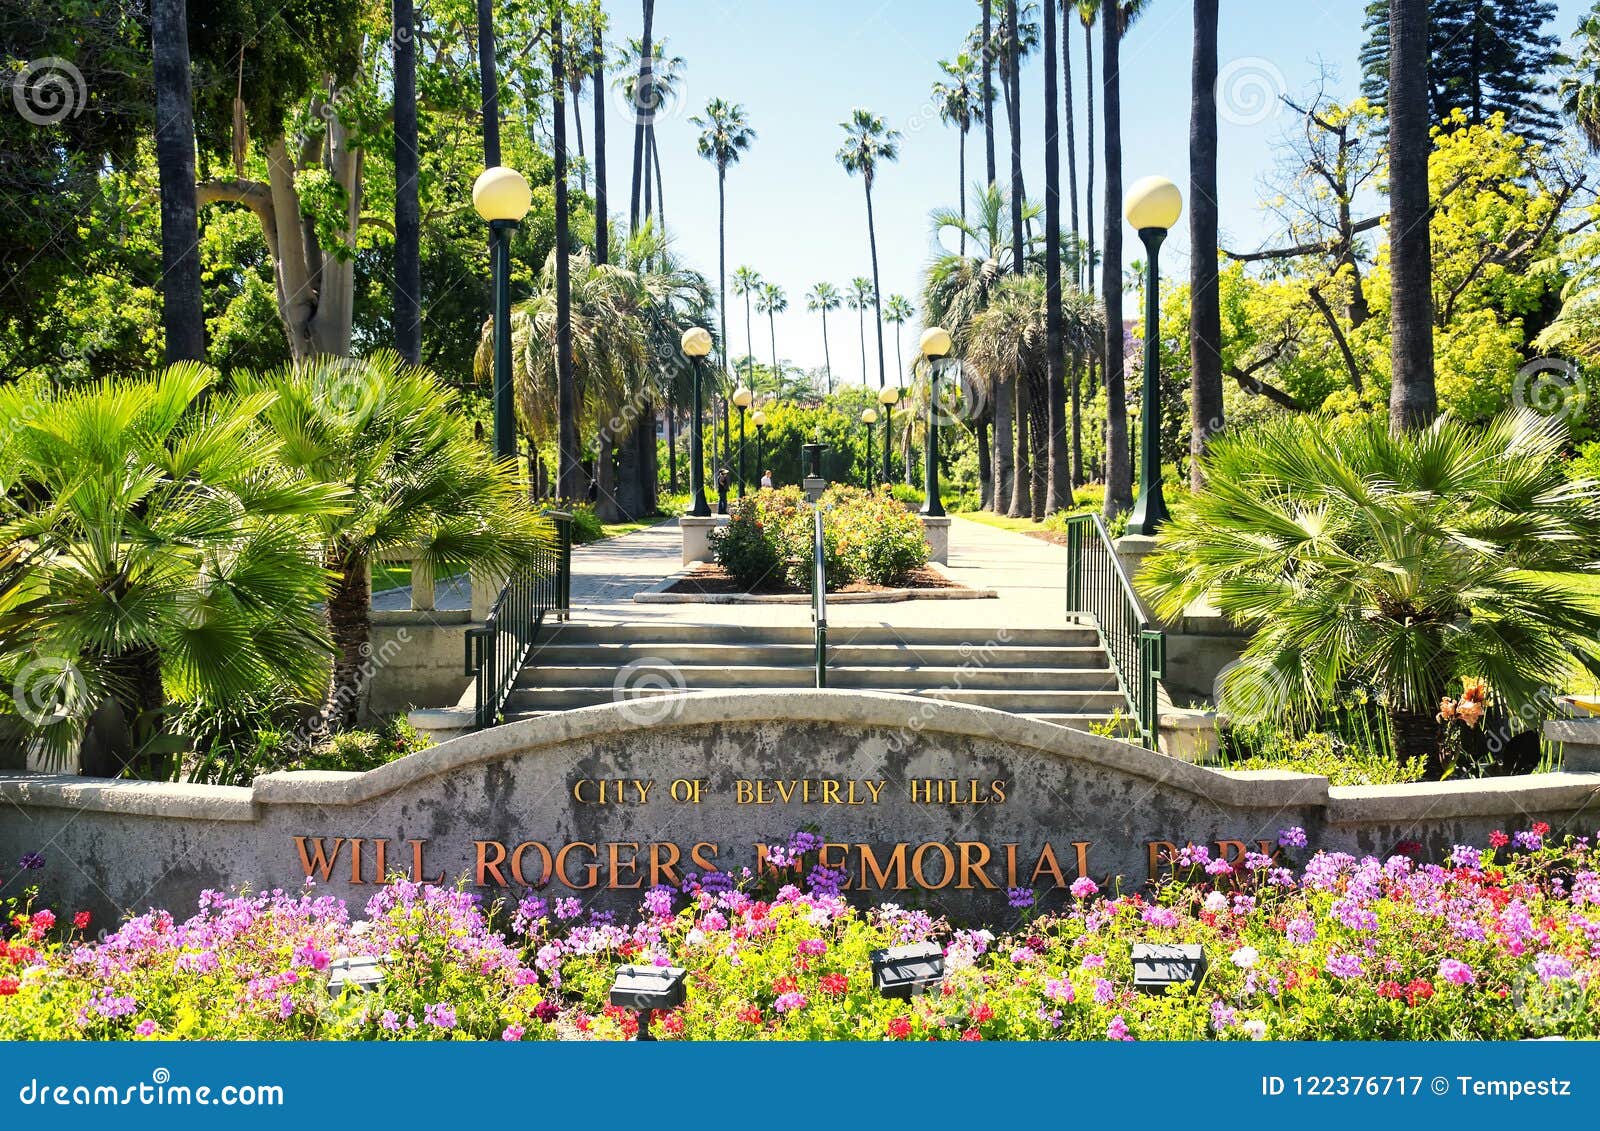 Will Rogers Memorial Park In Beverly Hills California Stock Image